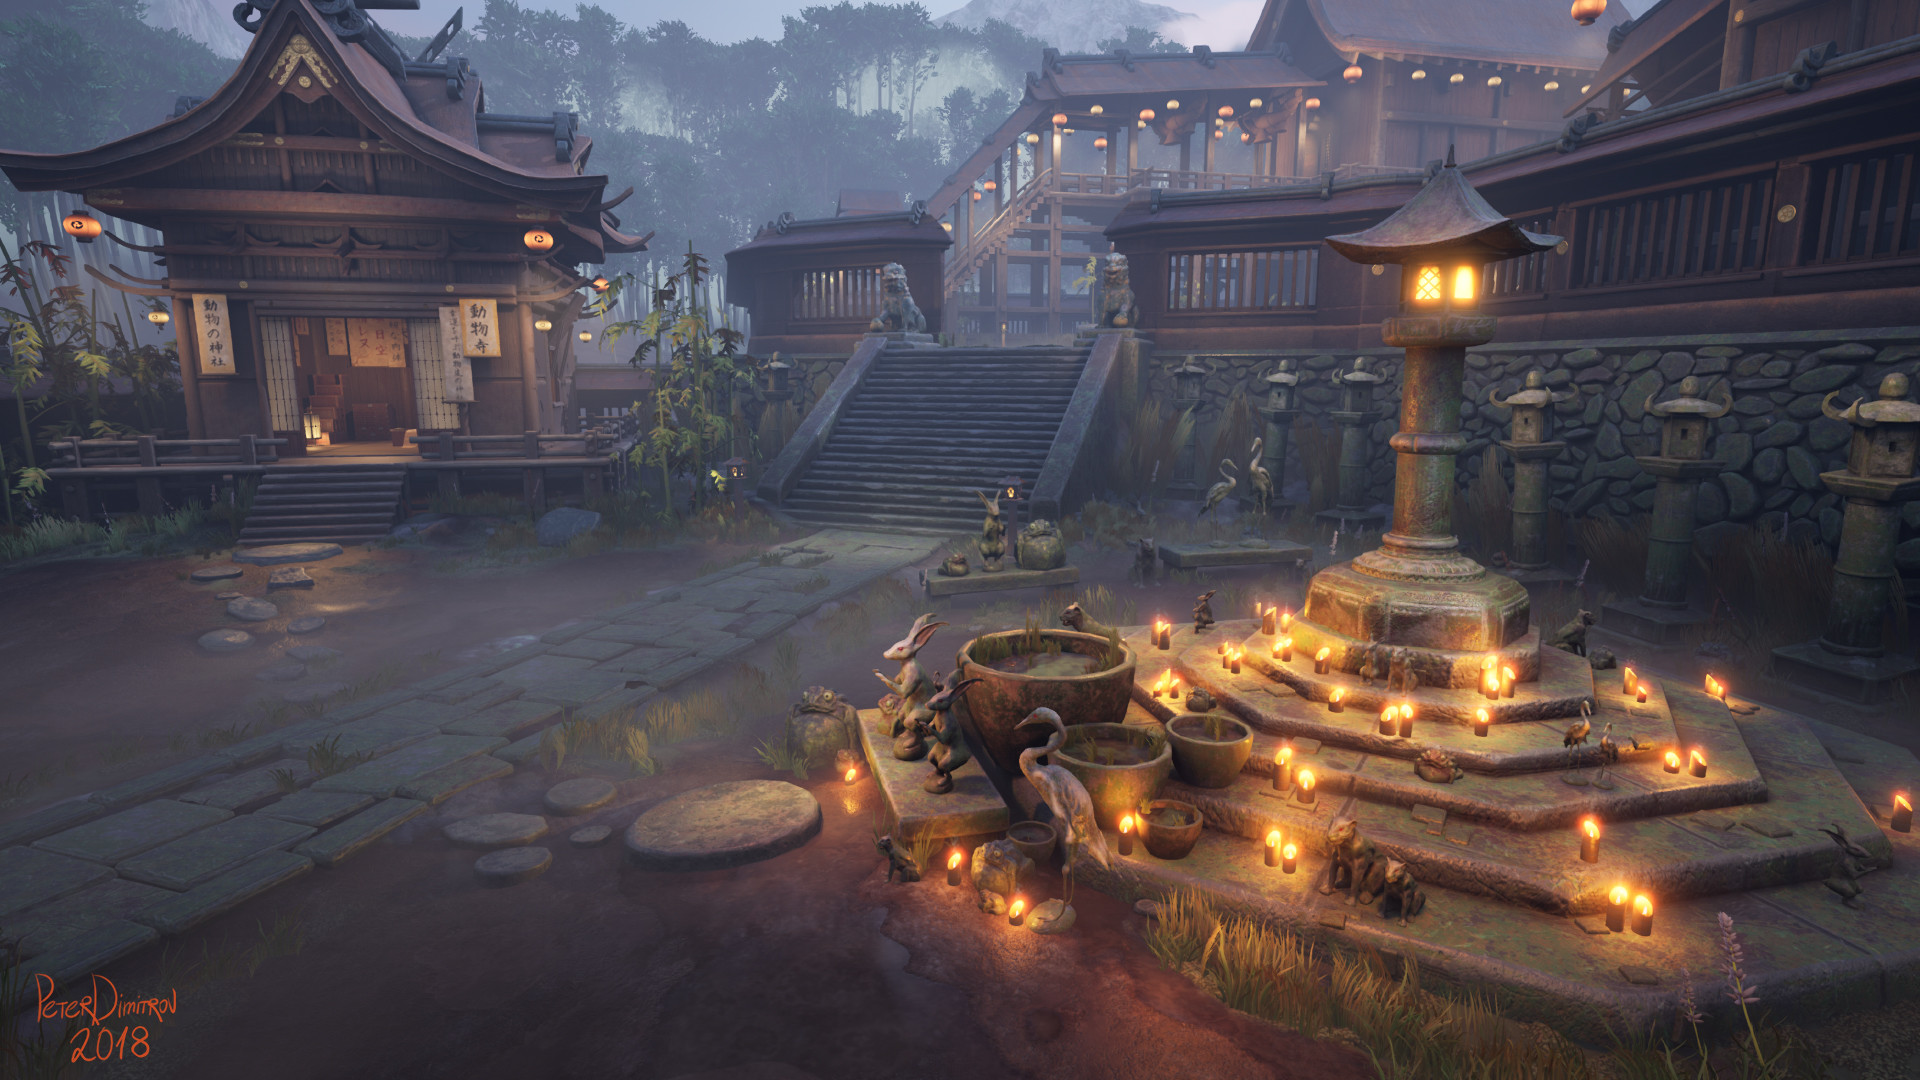 Main angle screenshot. To the left is the calligraphers hut with all the fortune scrolls attached to it. To the right is the circular shine with lots of animal statues in front of a water basin.